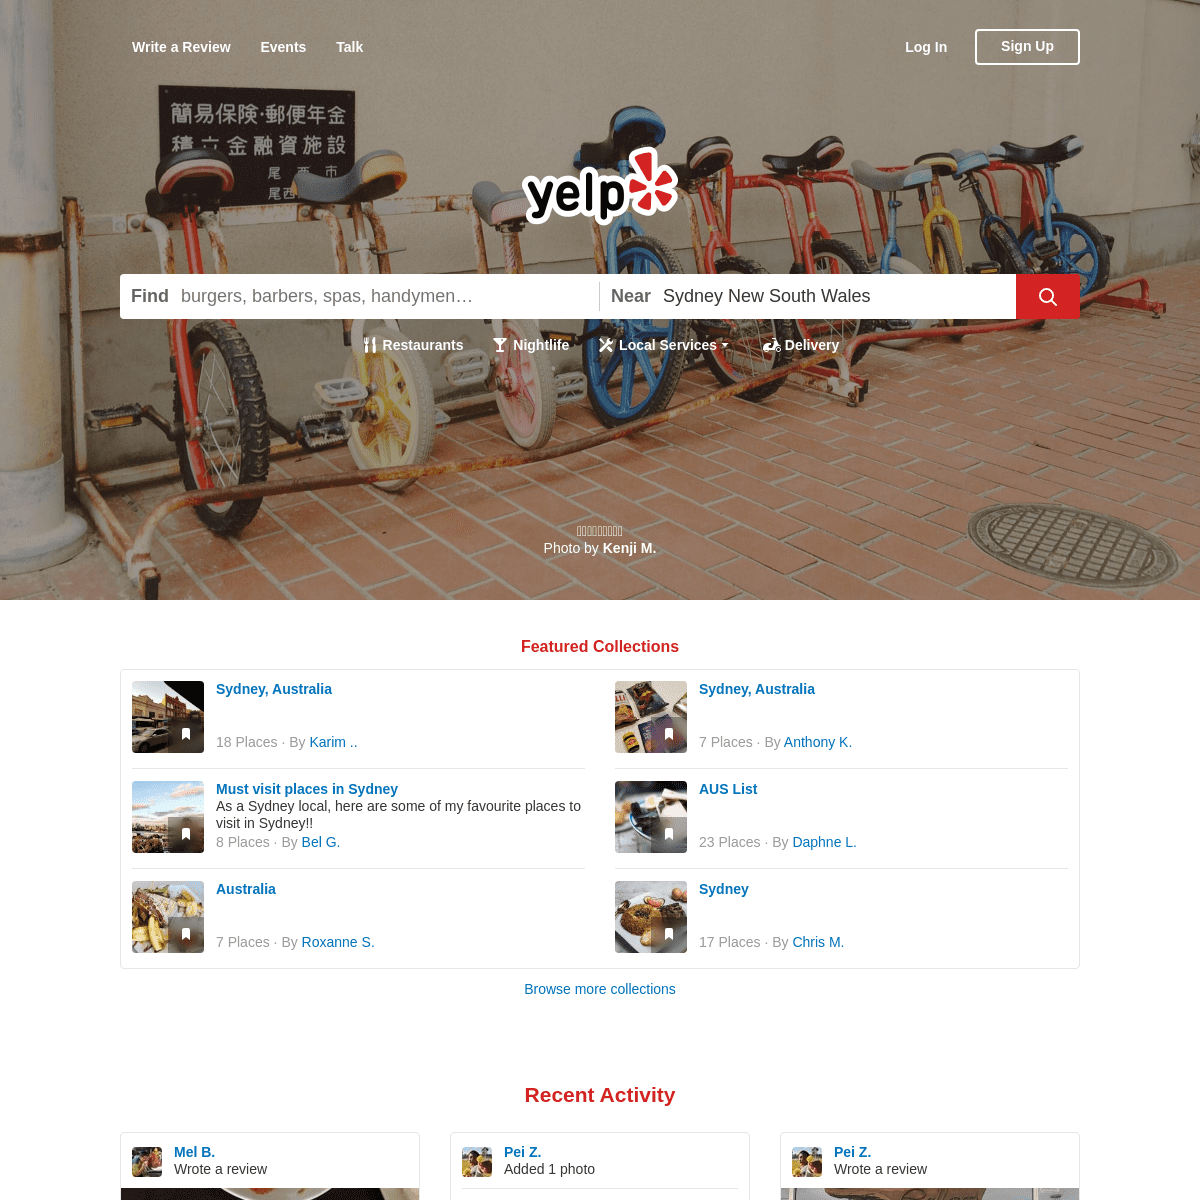 A complete backup of https://yelp.com.au